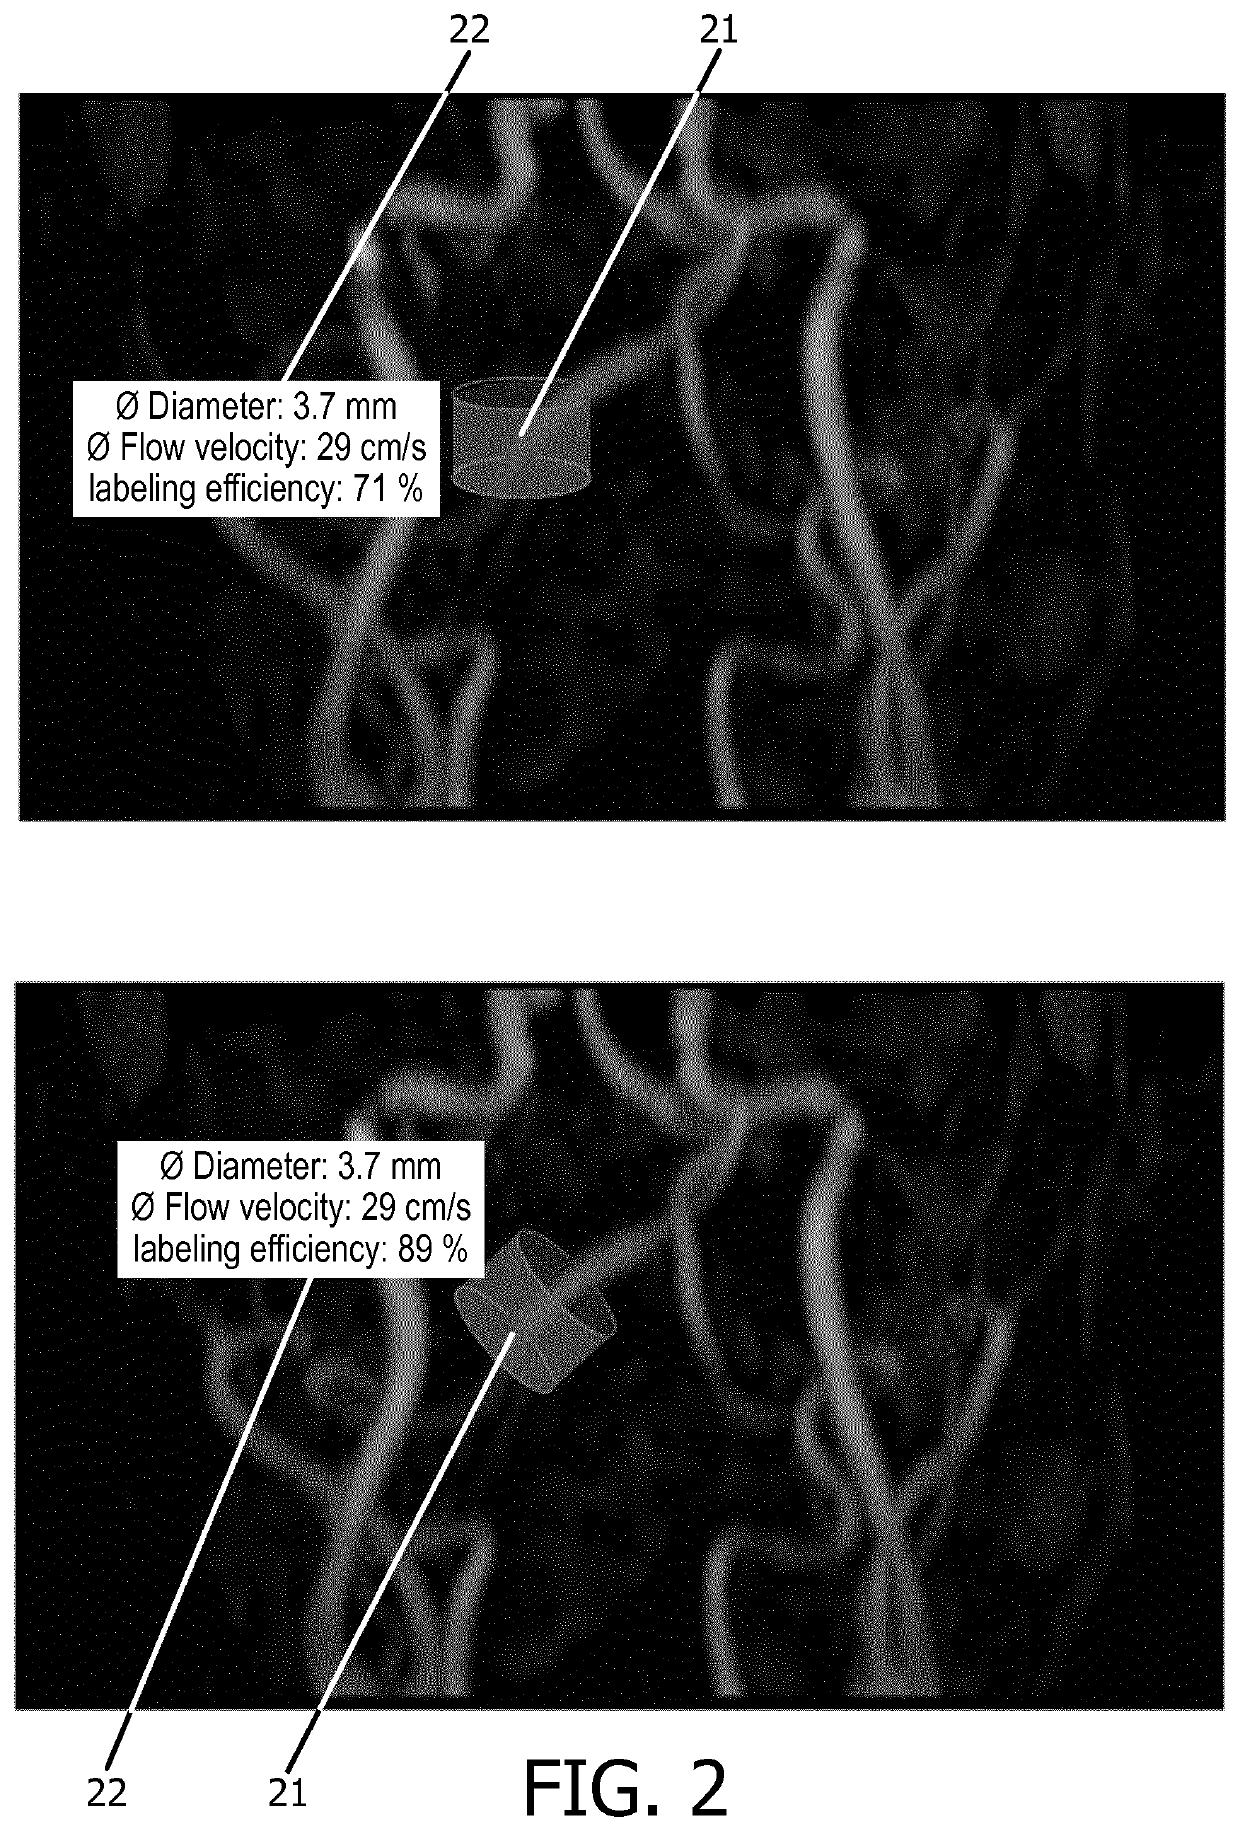 Planning support for selective arterial spin labeling mr imaging methods